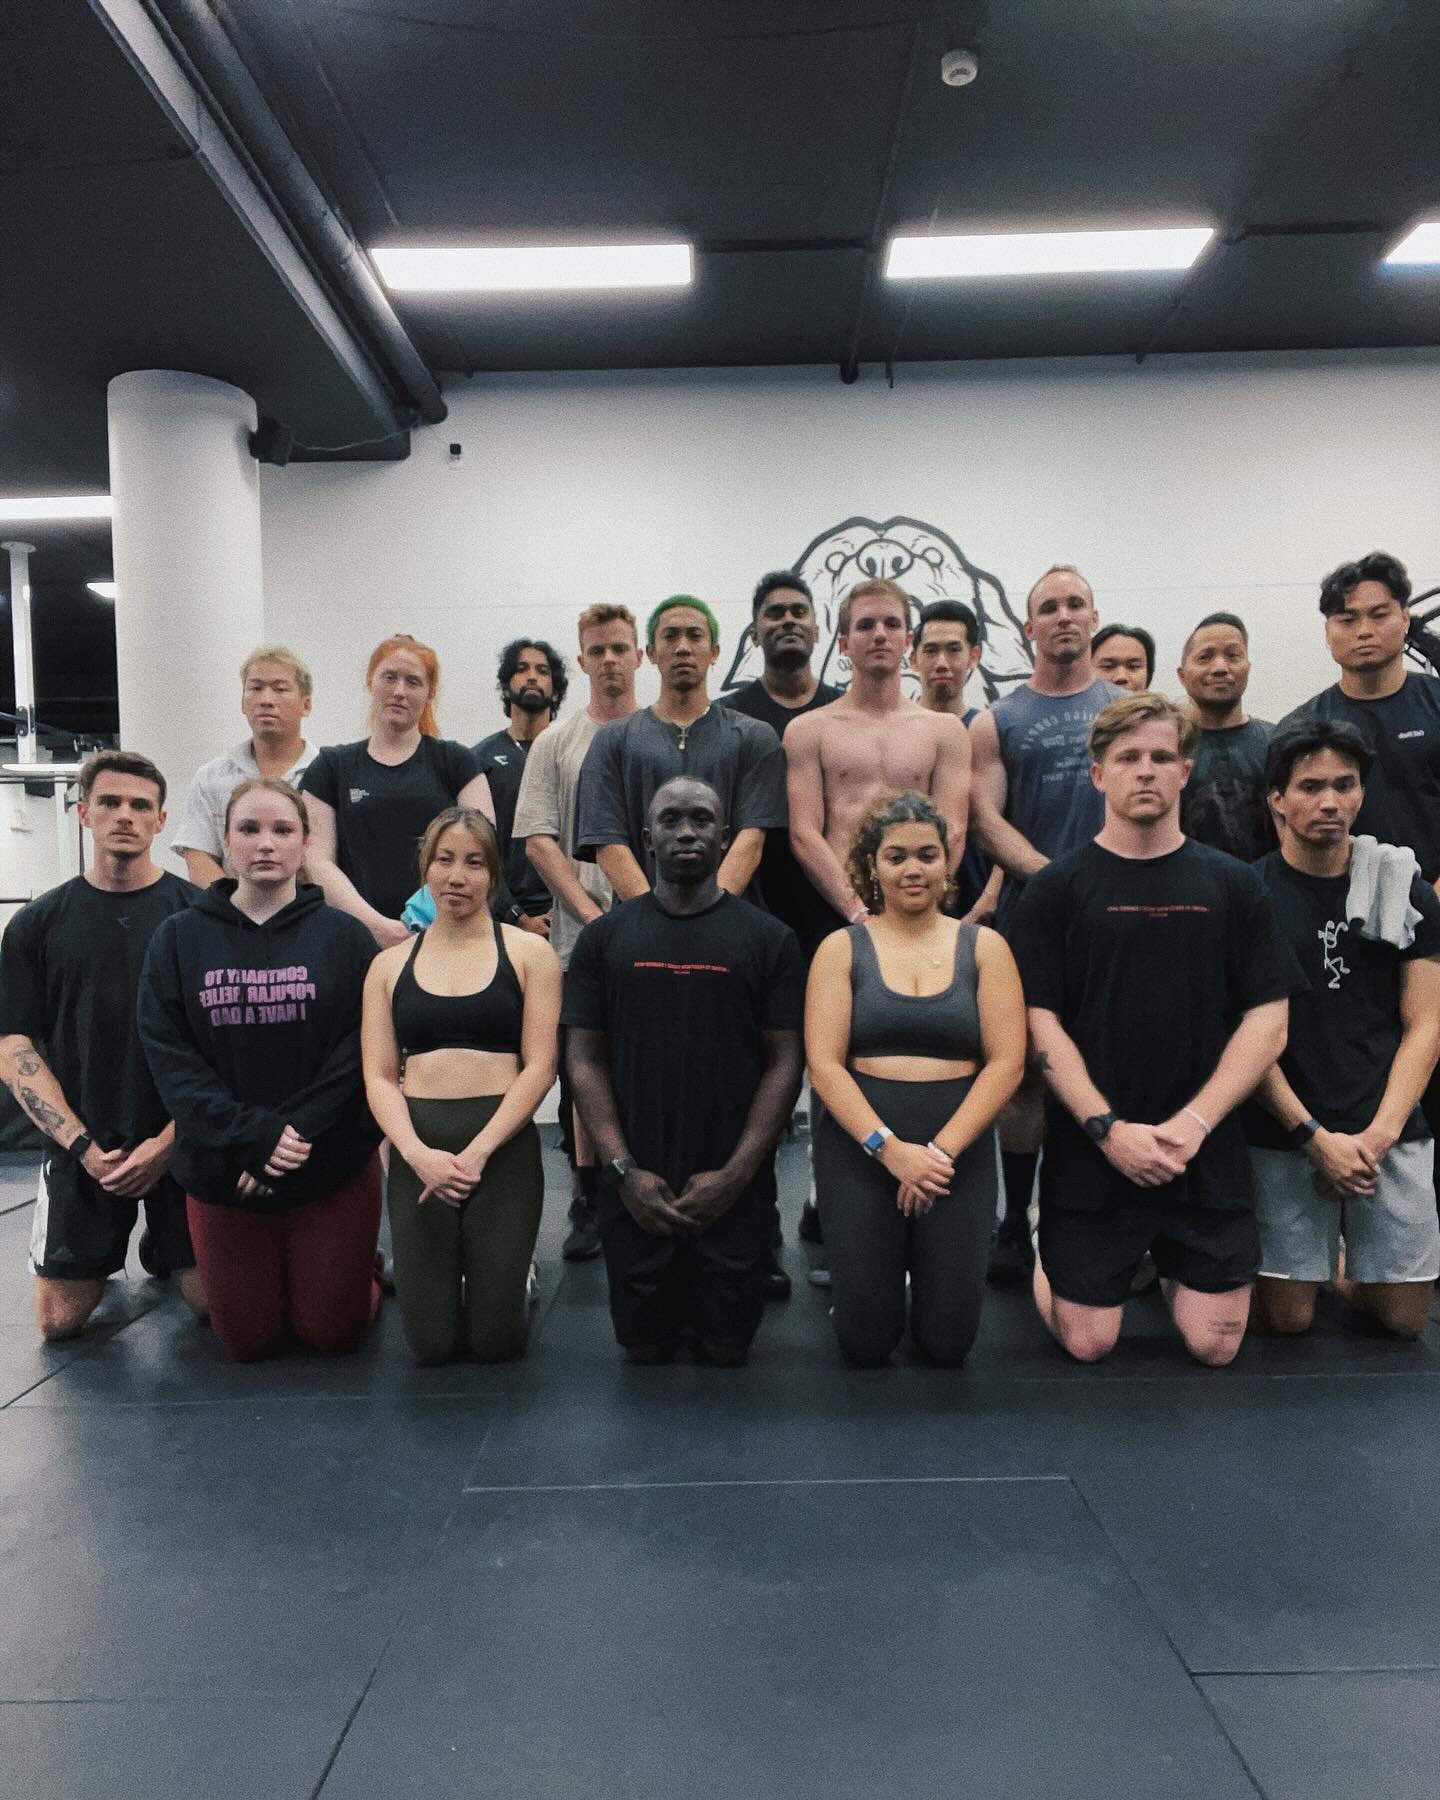 You don&rsquo;t have to be crazy fit to start at Cali Studio it&rsquo;s our job to make you that way.

Join the CALI STUDIO COMMUNITY.

If you&rsquo;ve been thinking about trying Cali Studio, now is the best time to start. Your session is on us!

Che